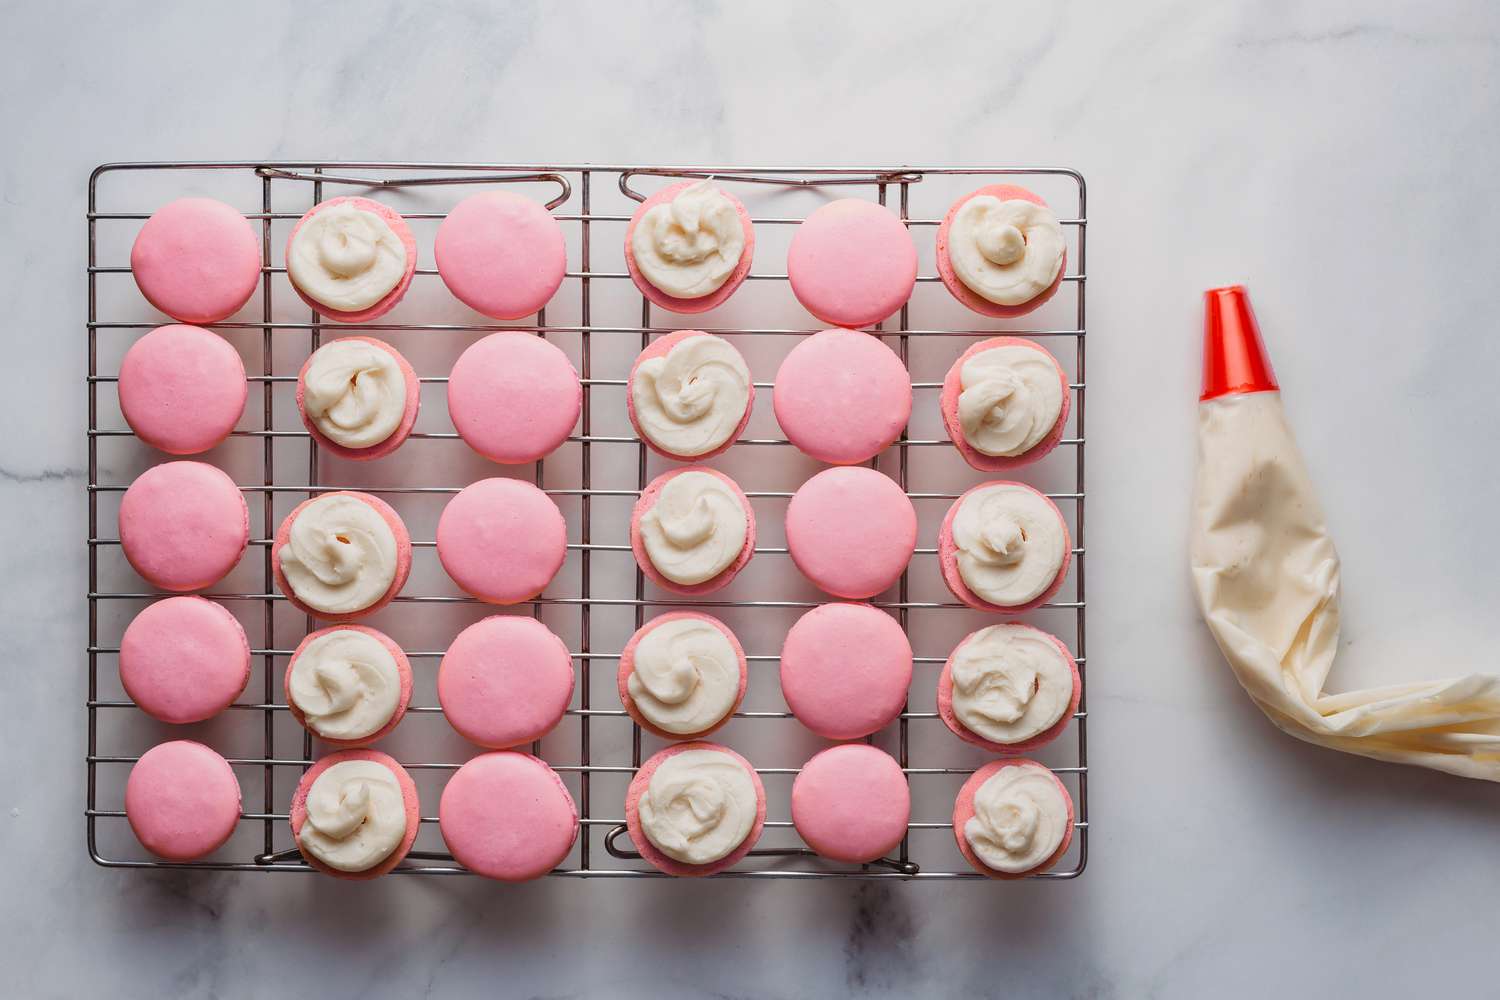 Flat side of half of the macarons covered with a circle of buttercream